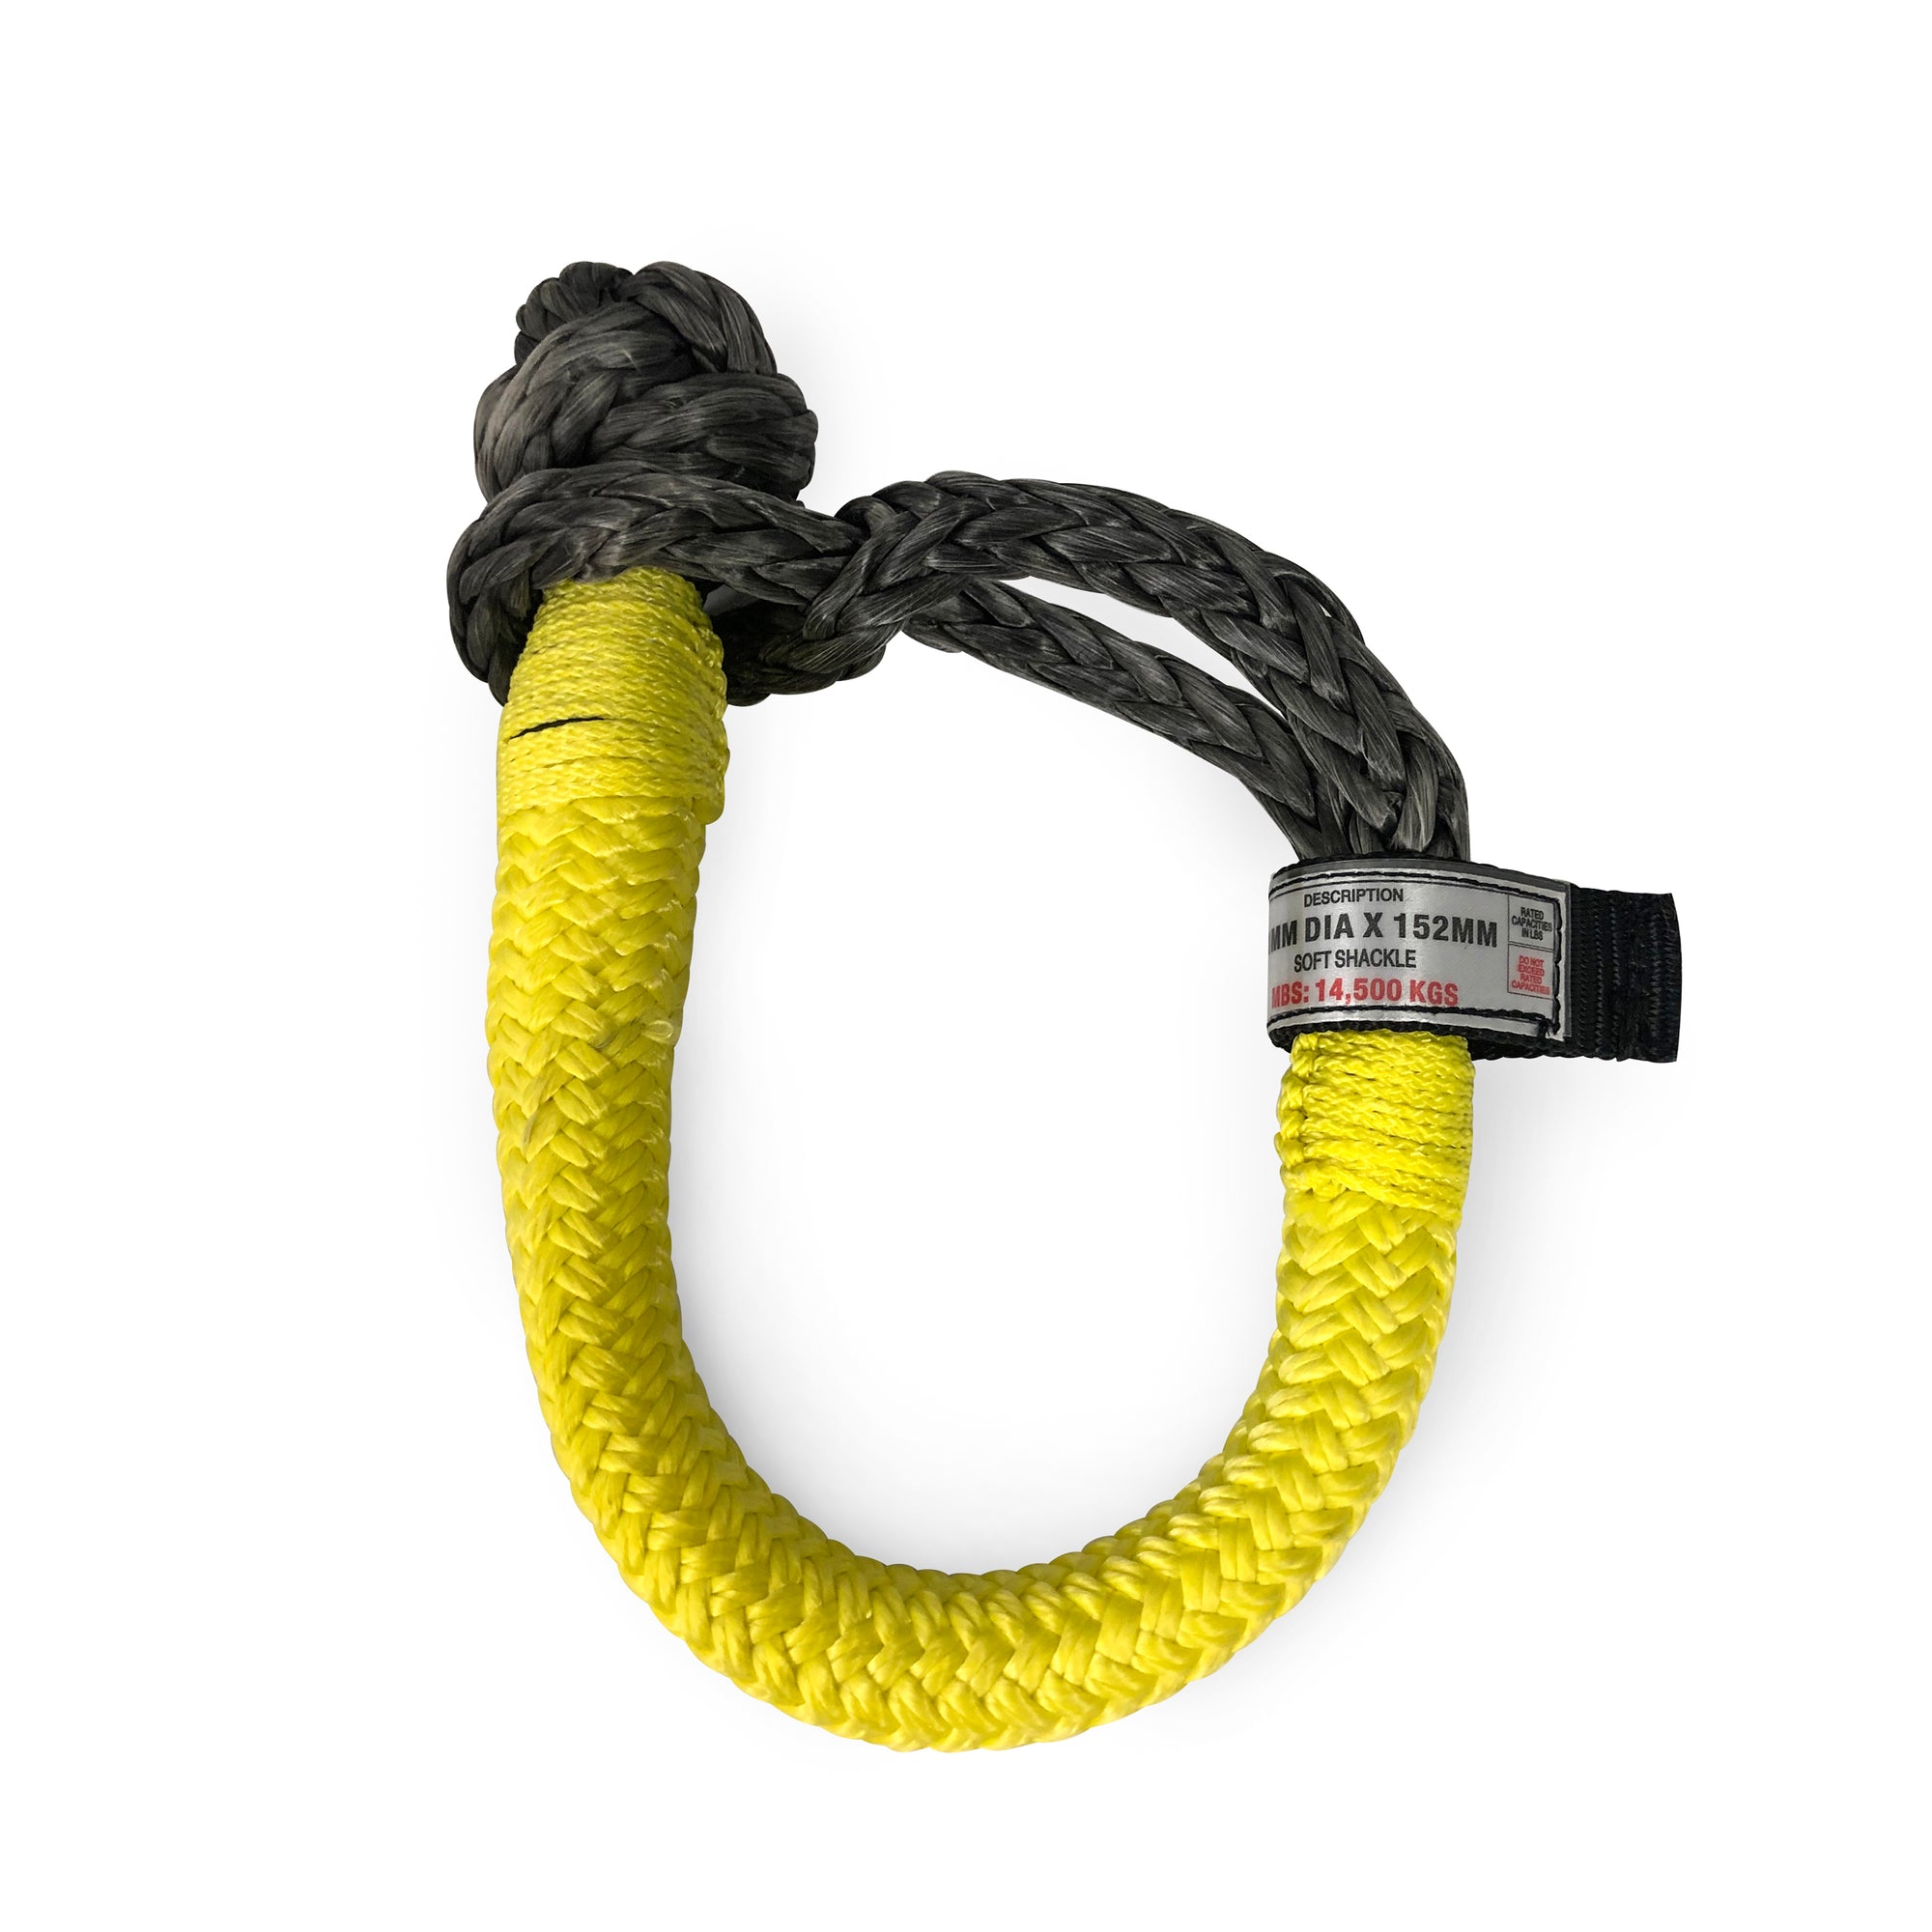 Sherpa 4x4 rope soft shackle offroad recovery 4wd